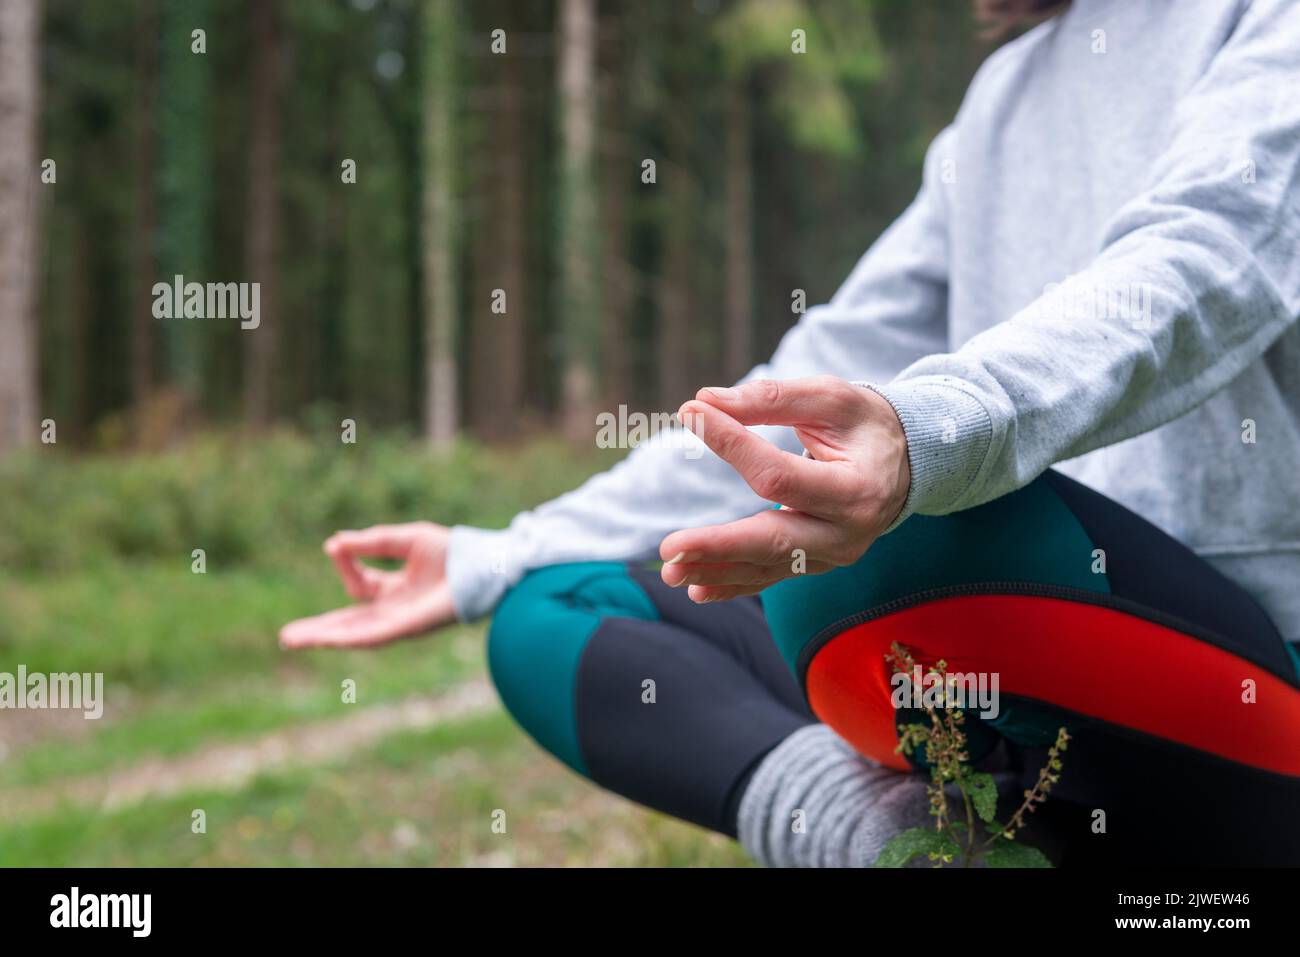 Close up of a person practicing yoga in a forest, yoga hands. Stock Photo